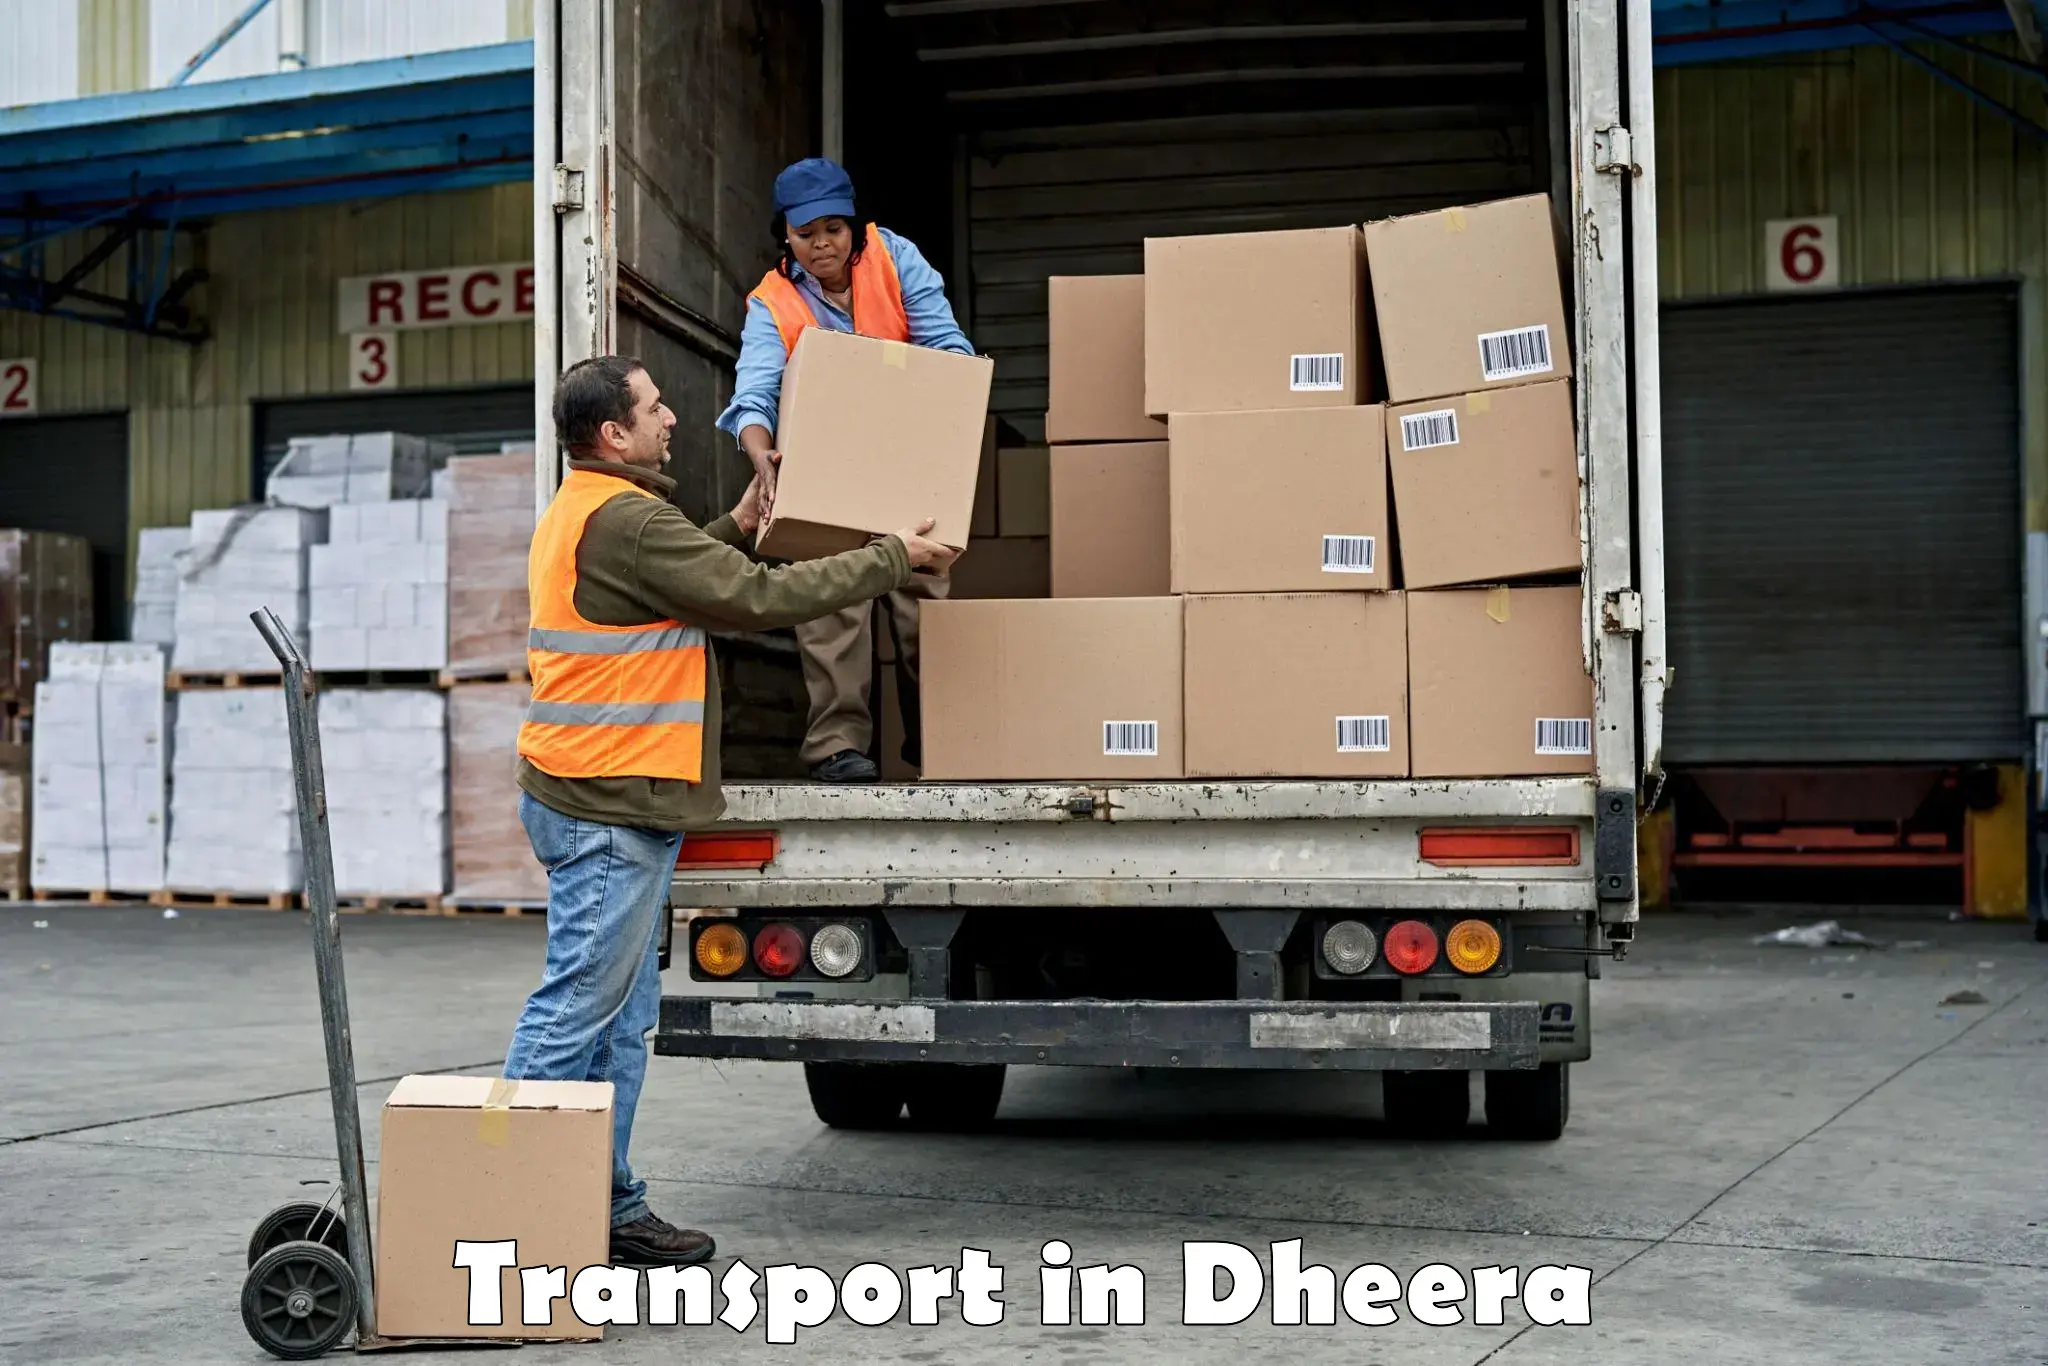 Truck transport companies in India in Dheera